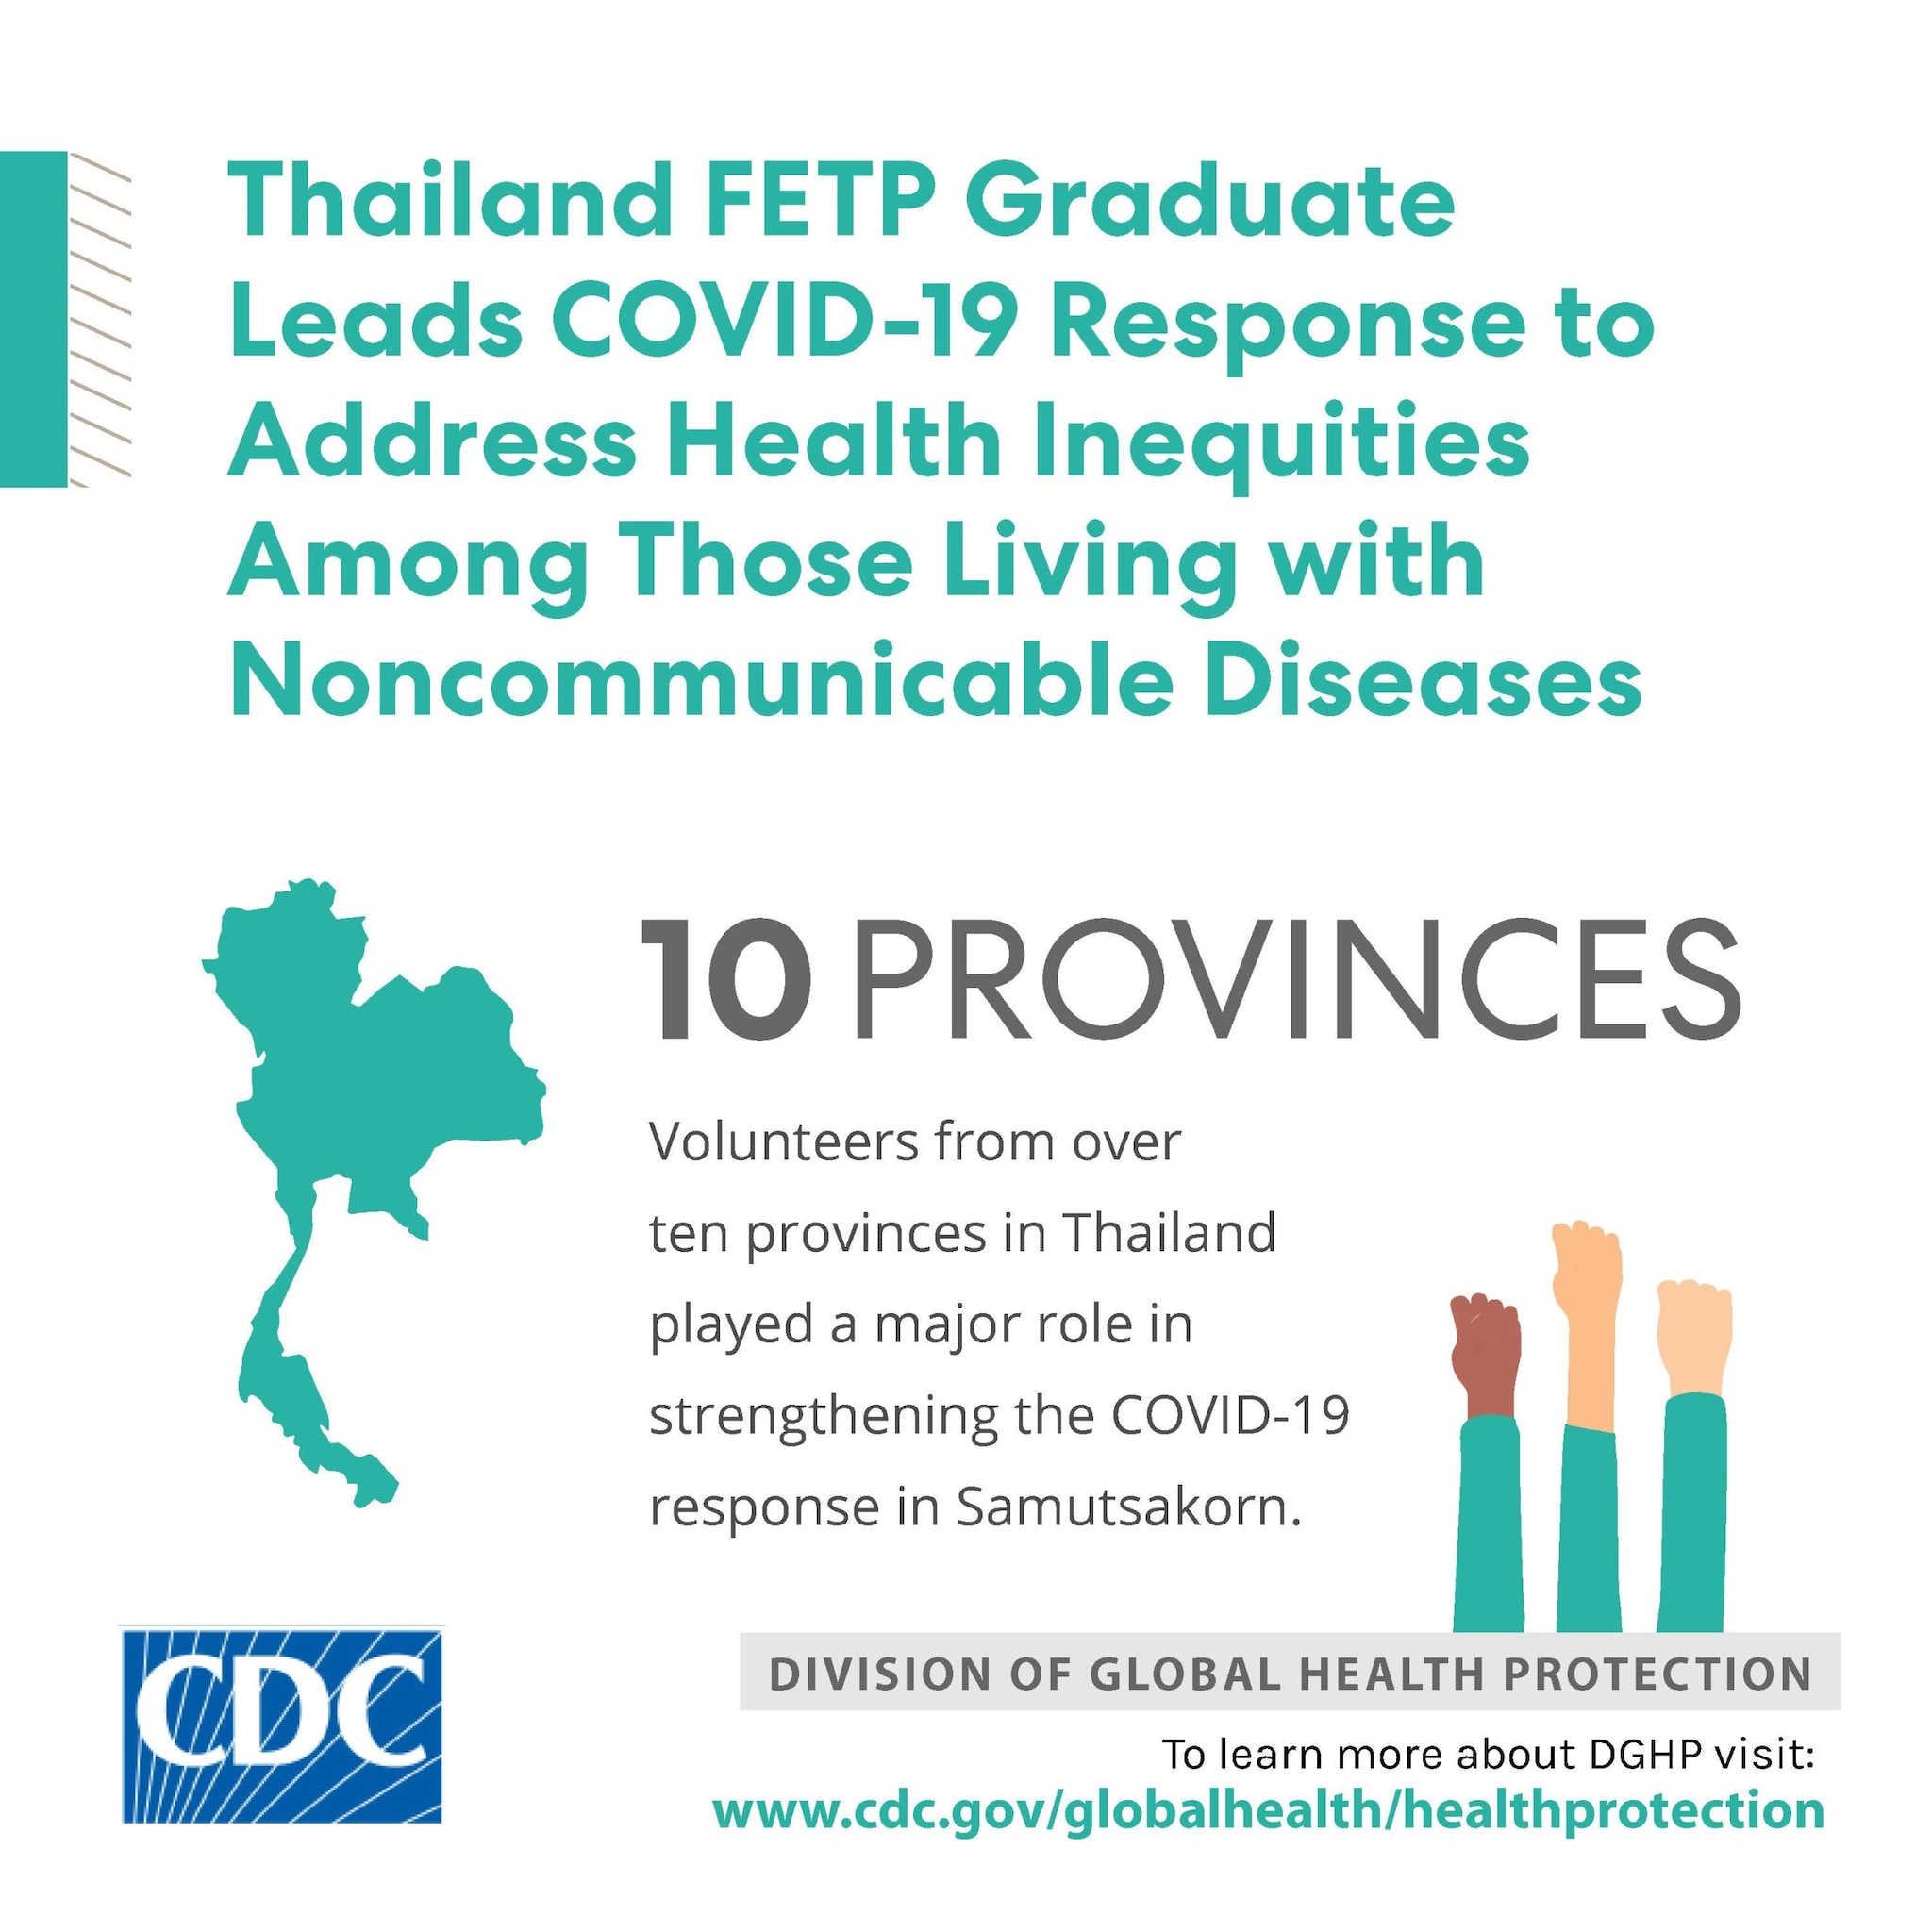 Thailand FETP Graduate Leads COVID-19 Response to Address Health Inequities Among Those Living with Noncommunicable Diseases